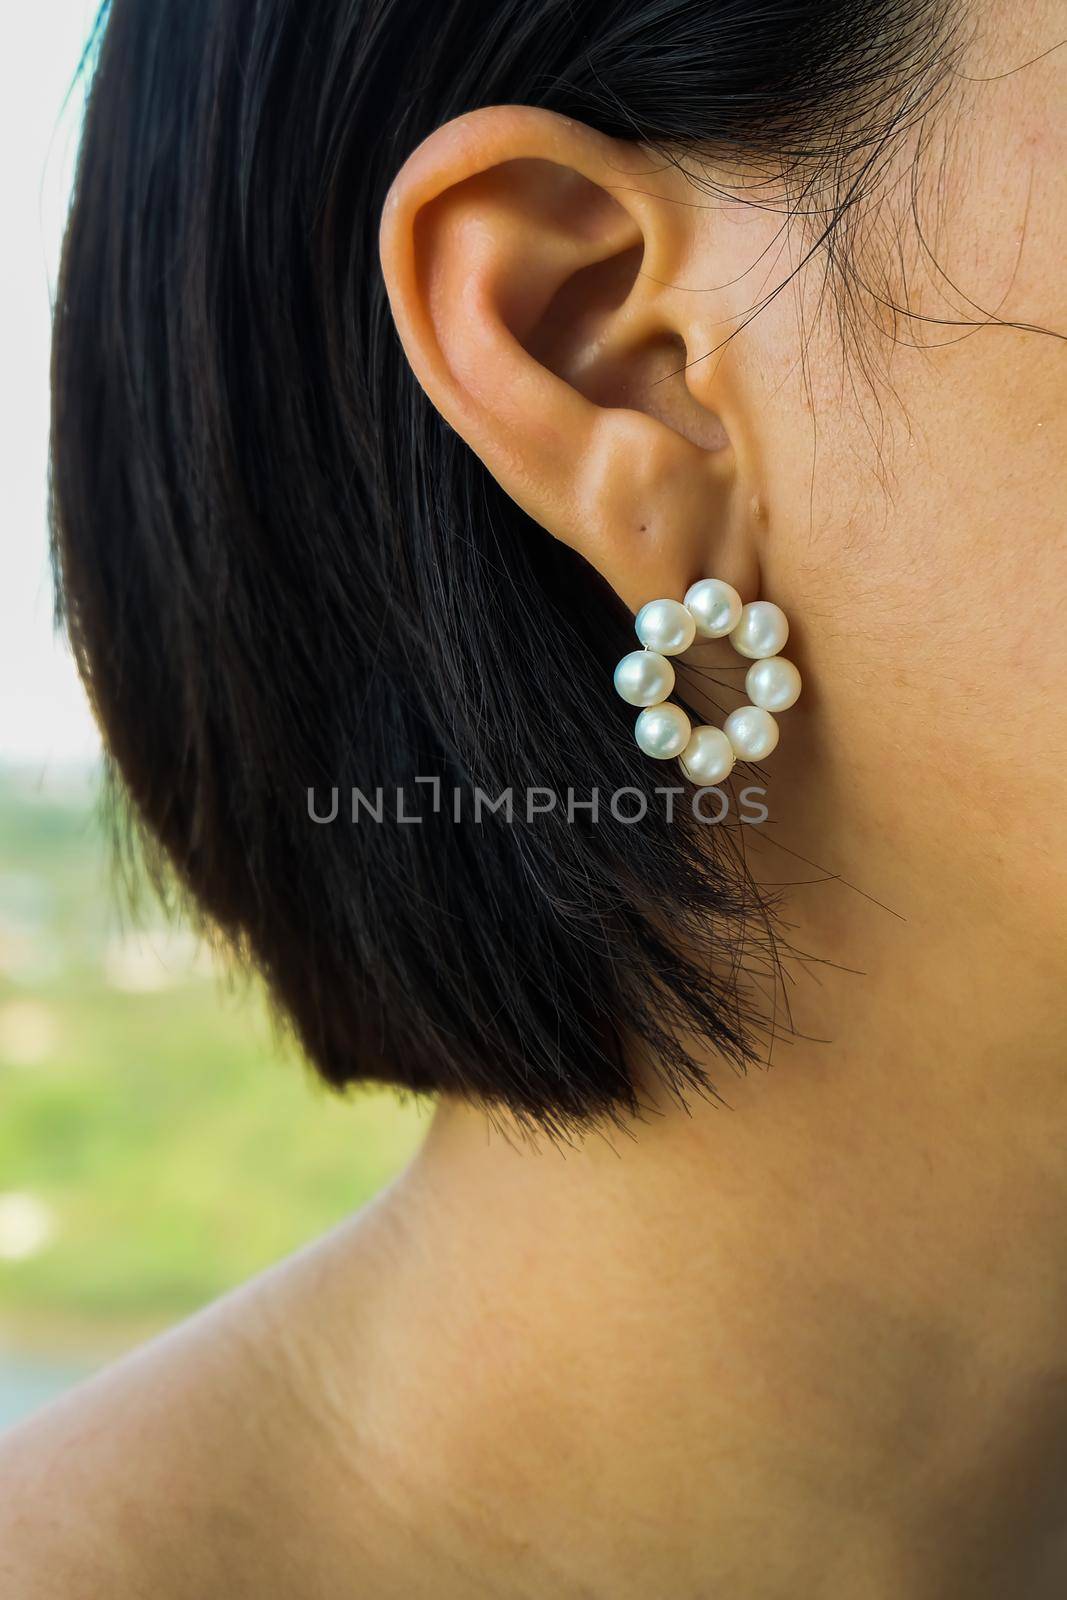 Detail of young woman wearing beautiful white pearl earring. Women accessories. Selective focus.